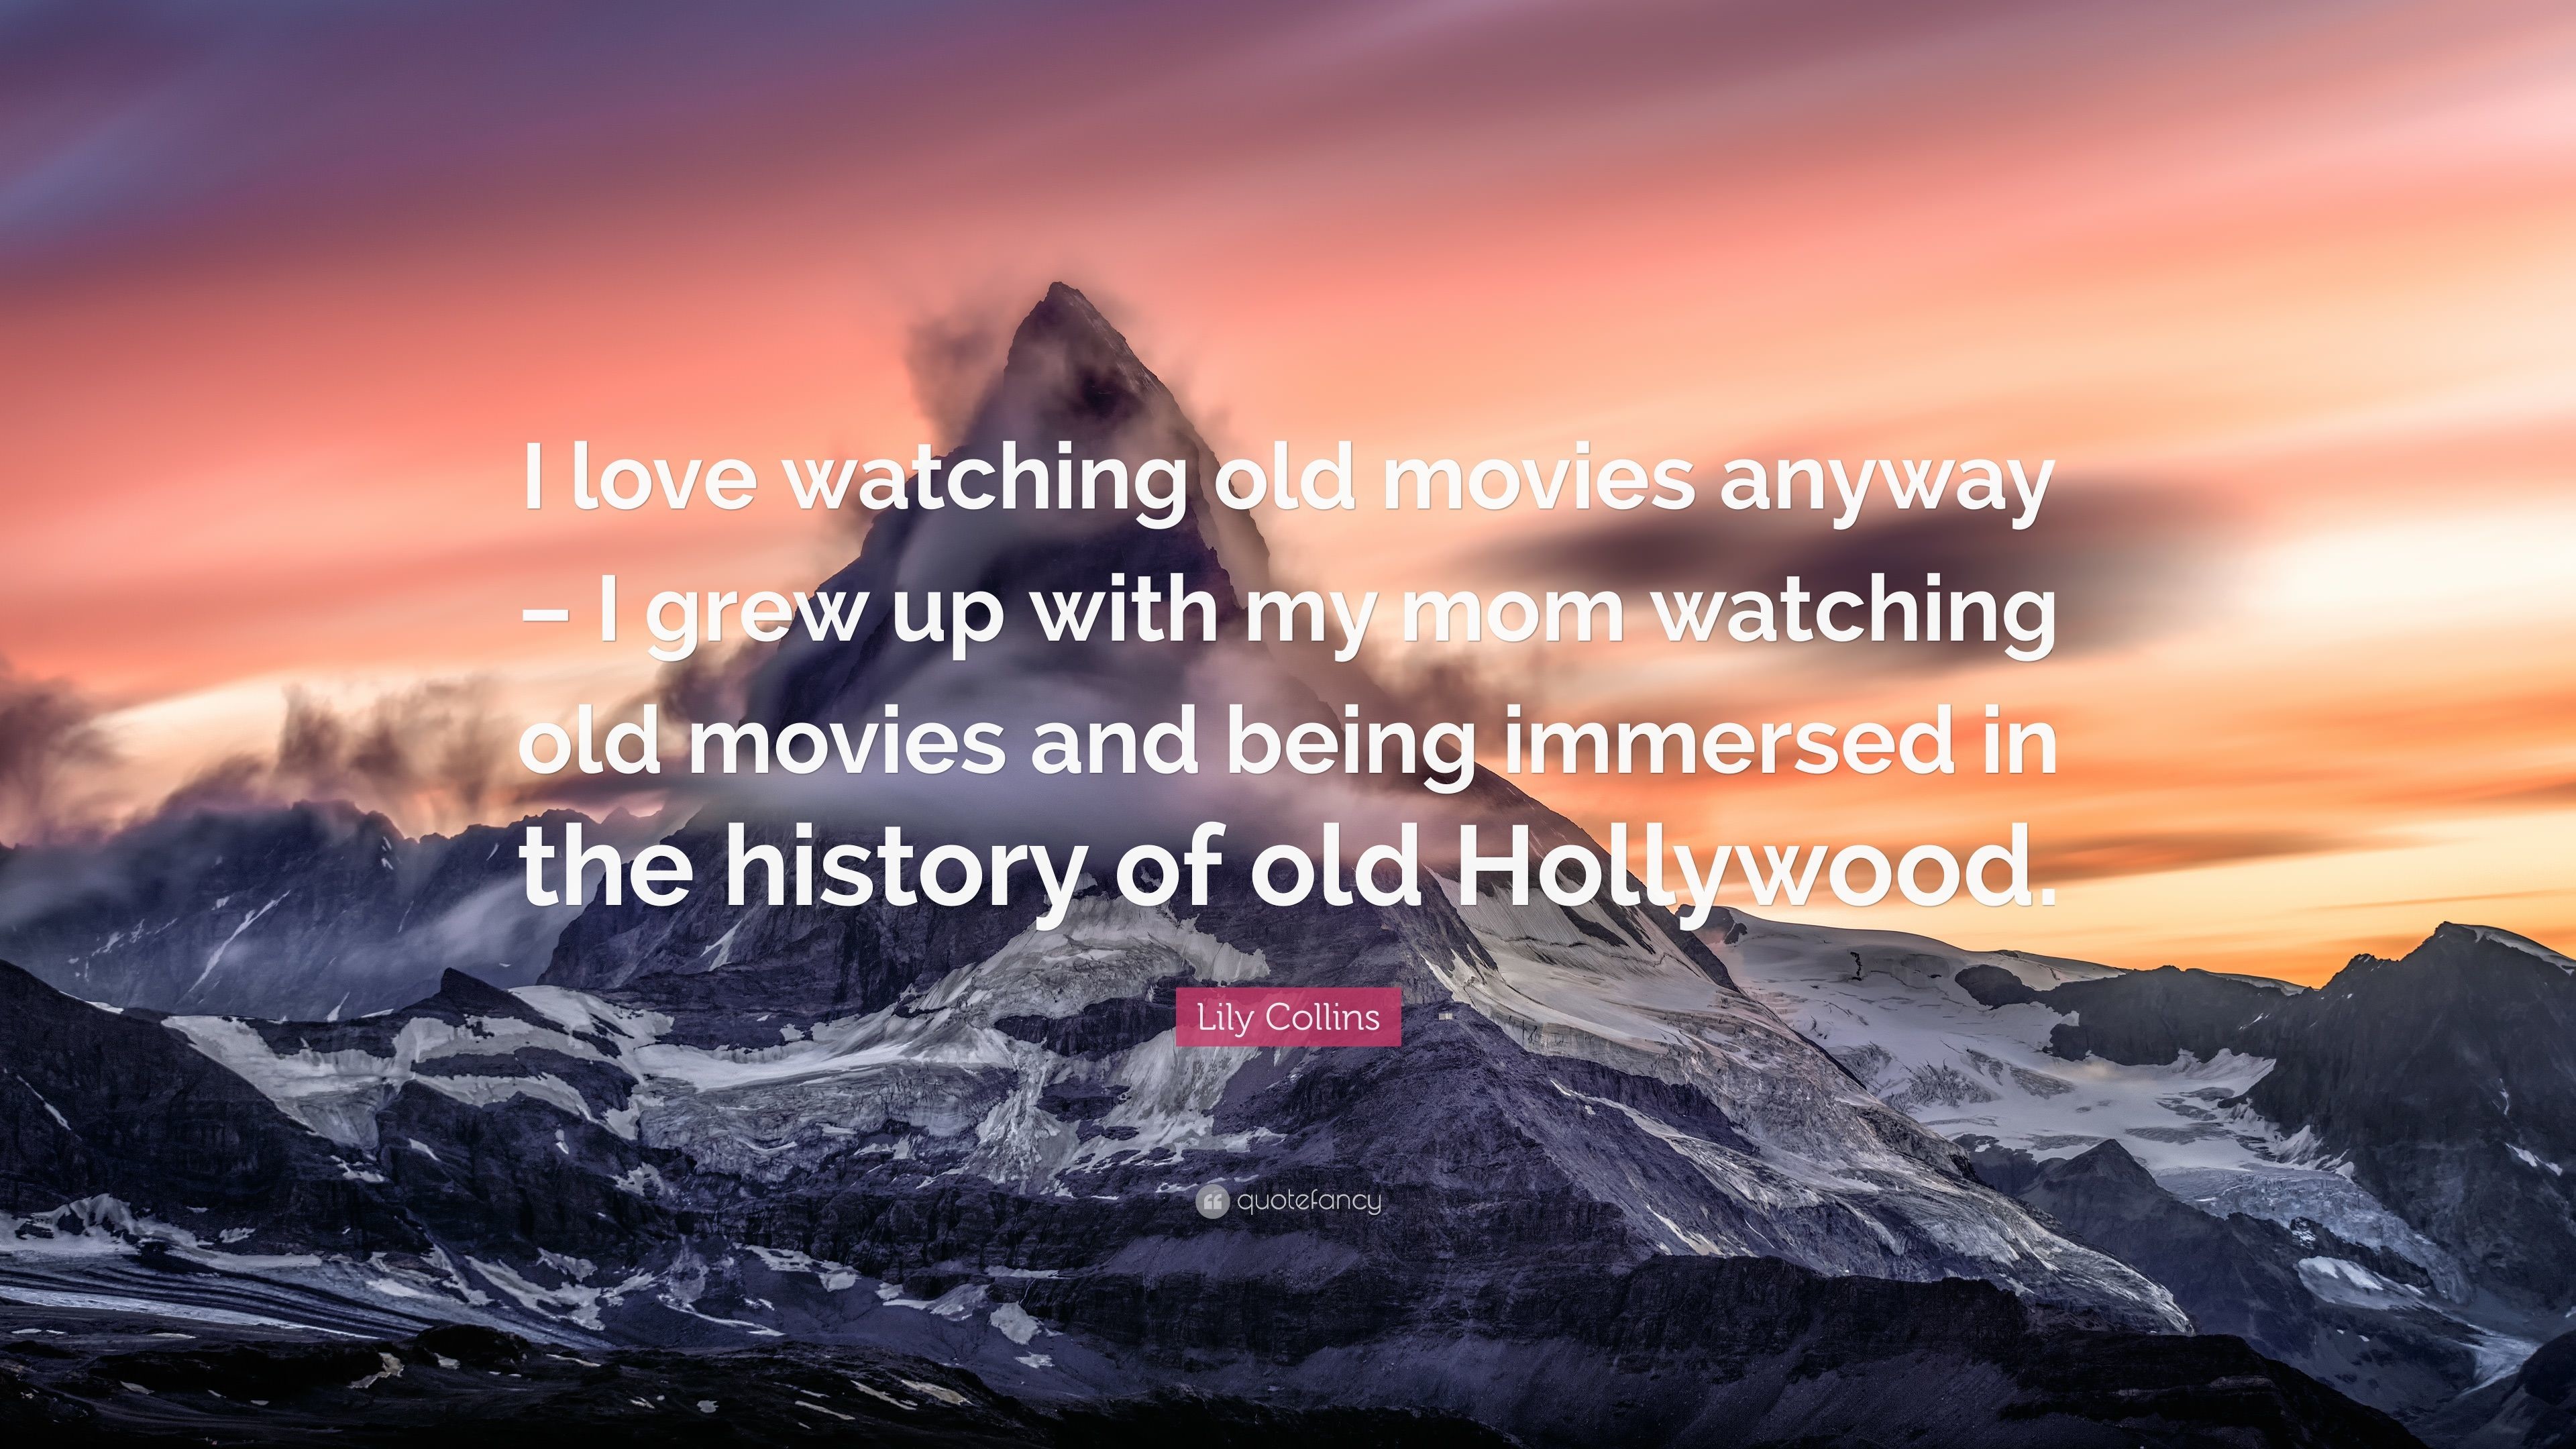 3840x2160 Lily Collins Quote: “I love watching old movies anyway – I grew up with